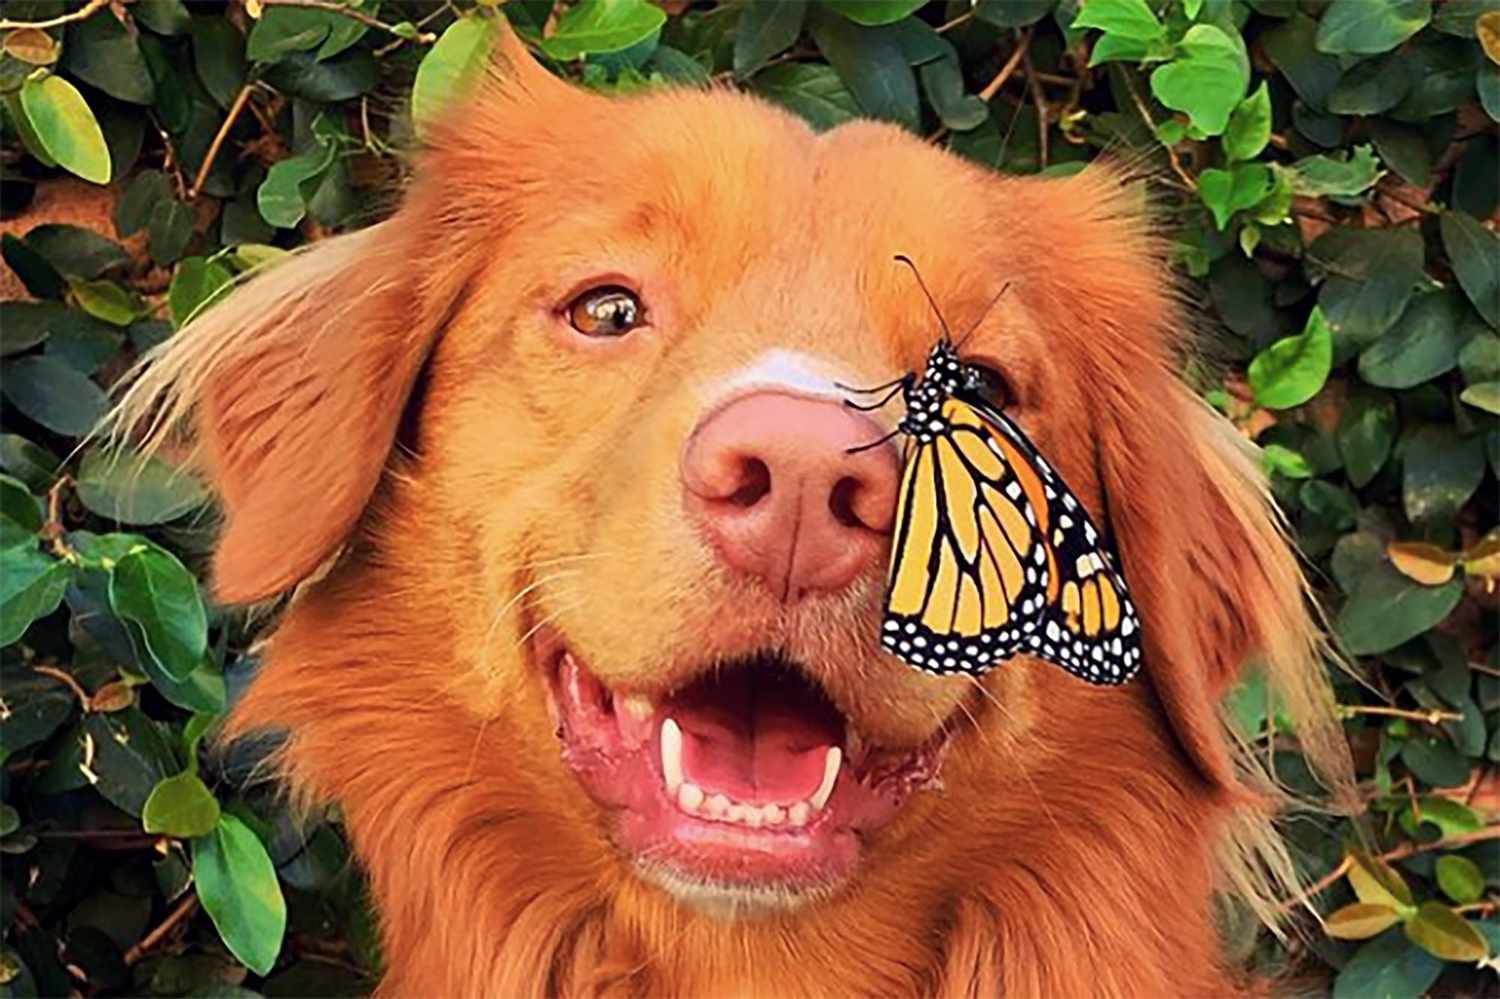 Butterfly sitting on Milo's nose